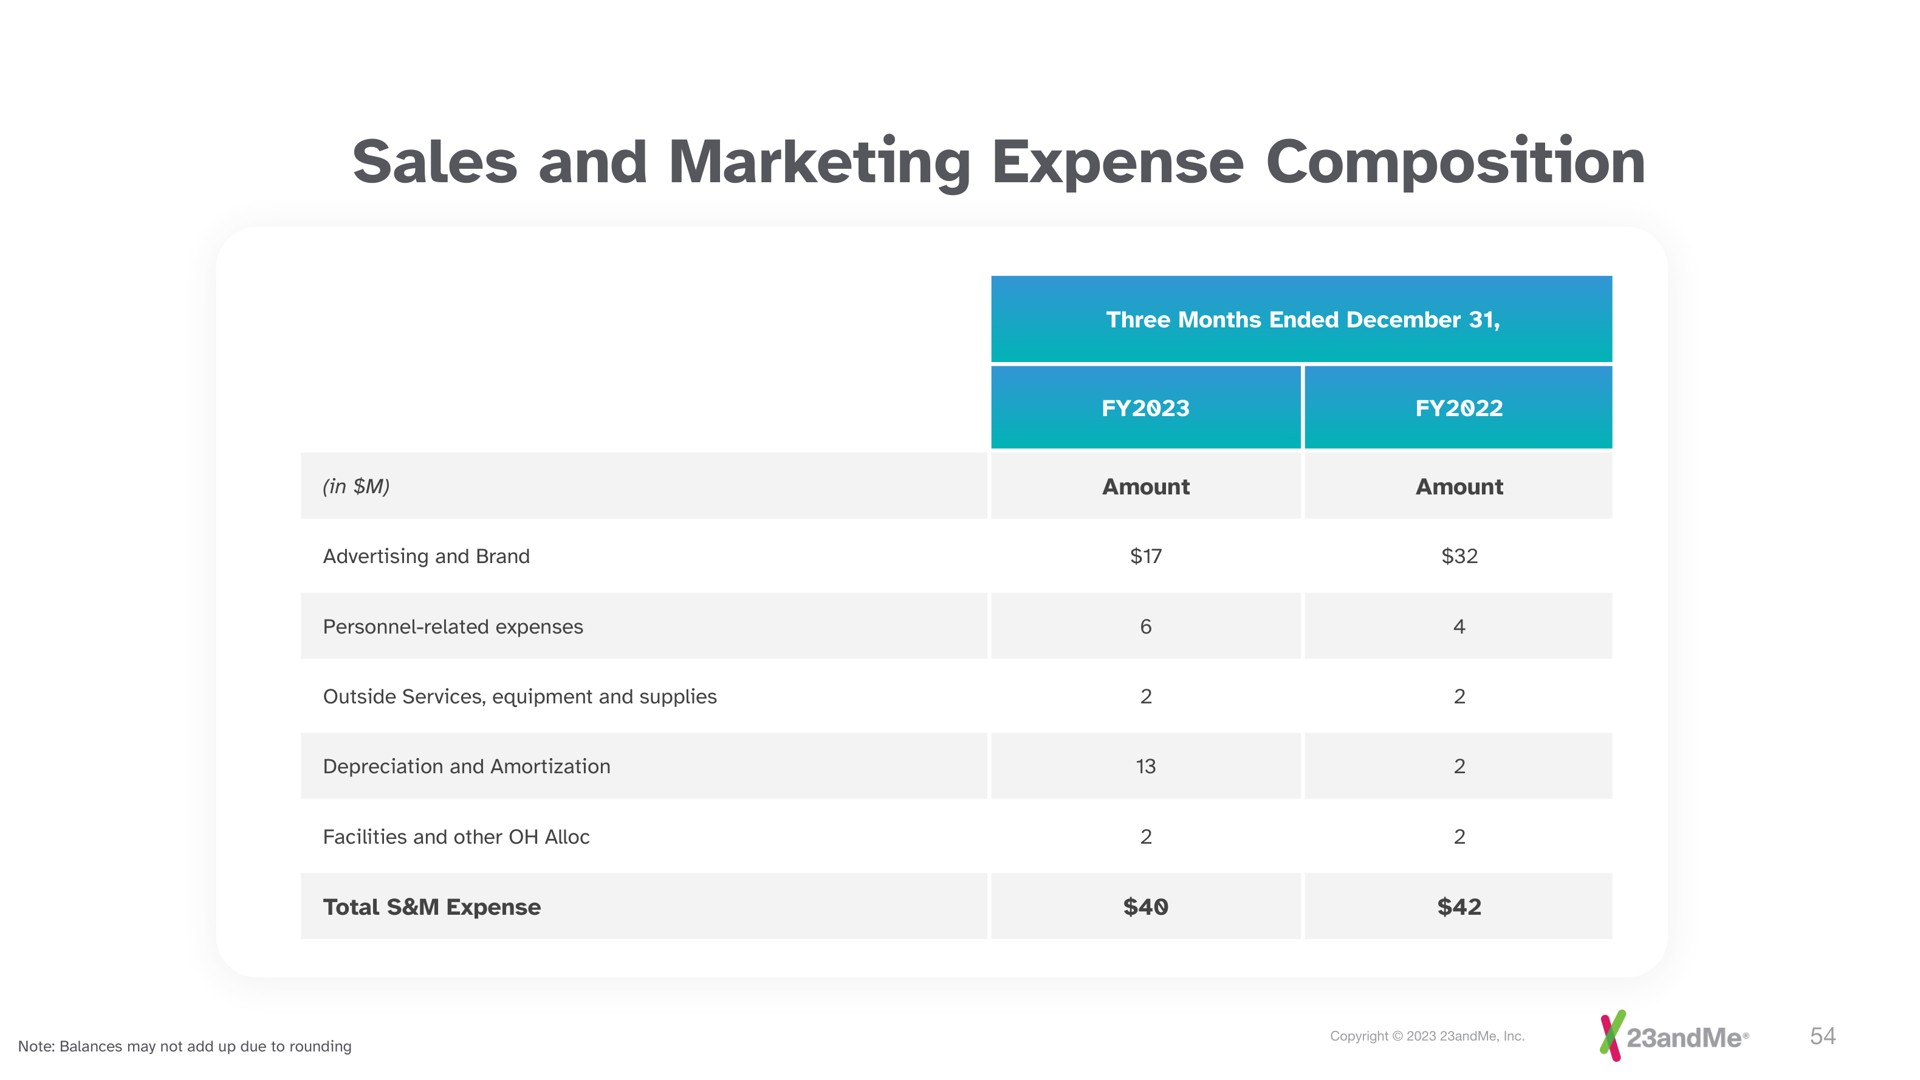 sales and marketing expense composition | 23andMe